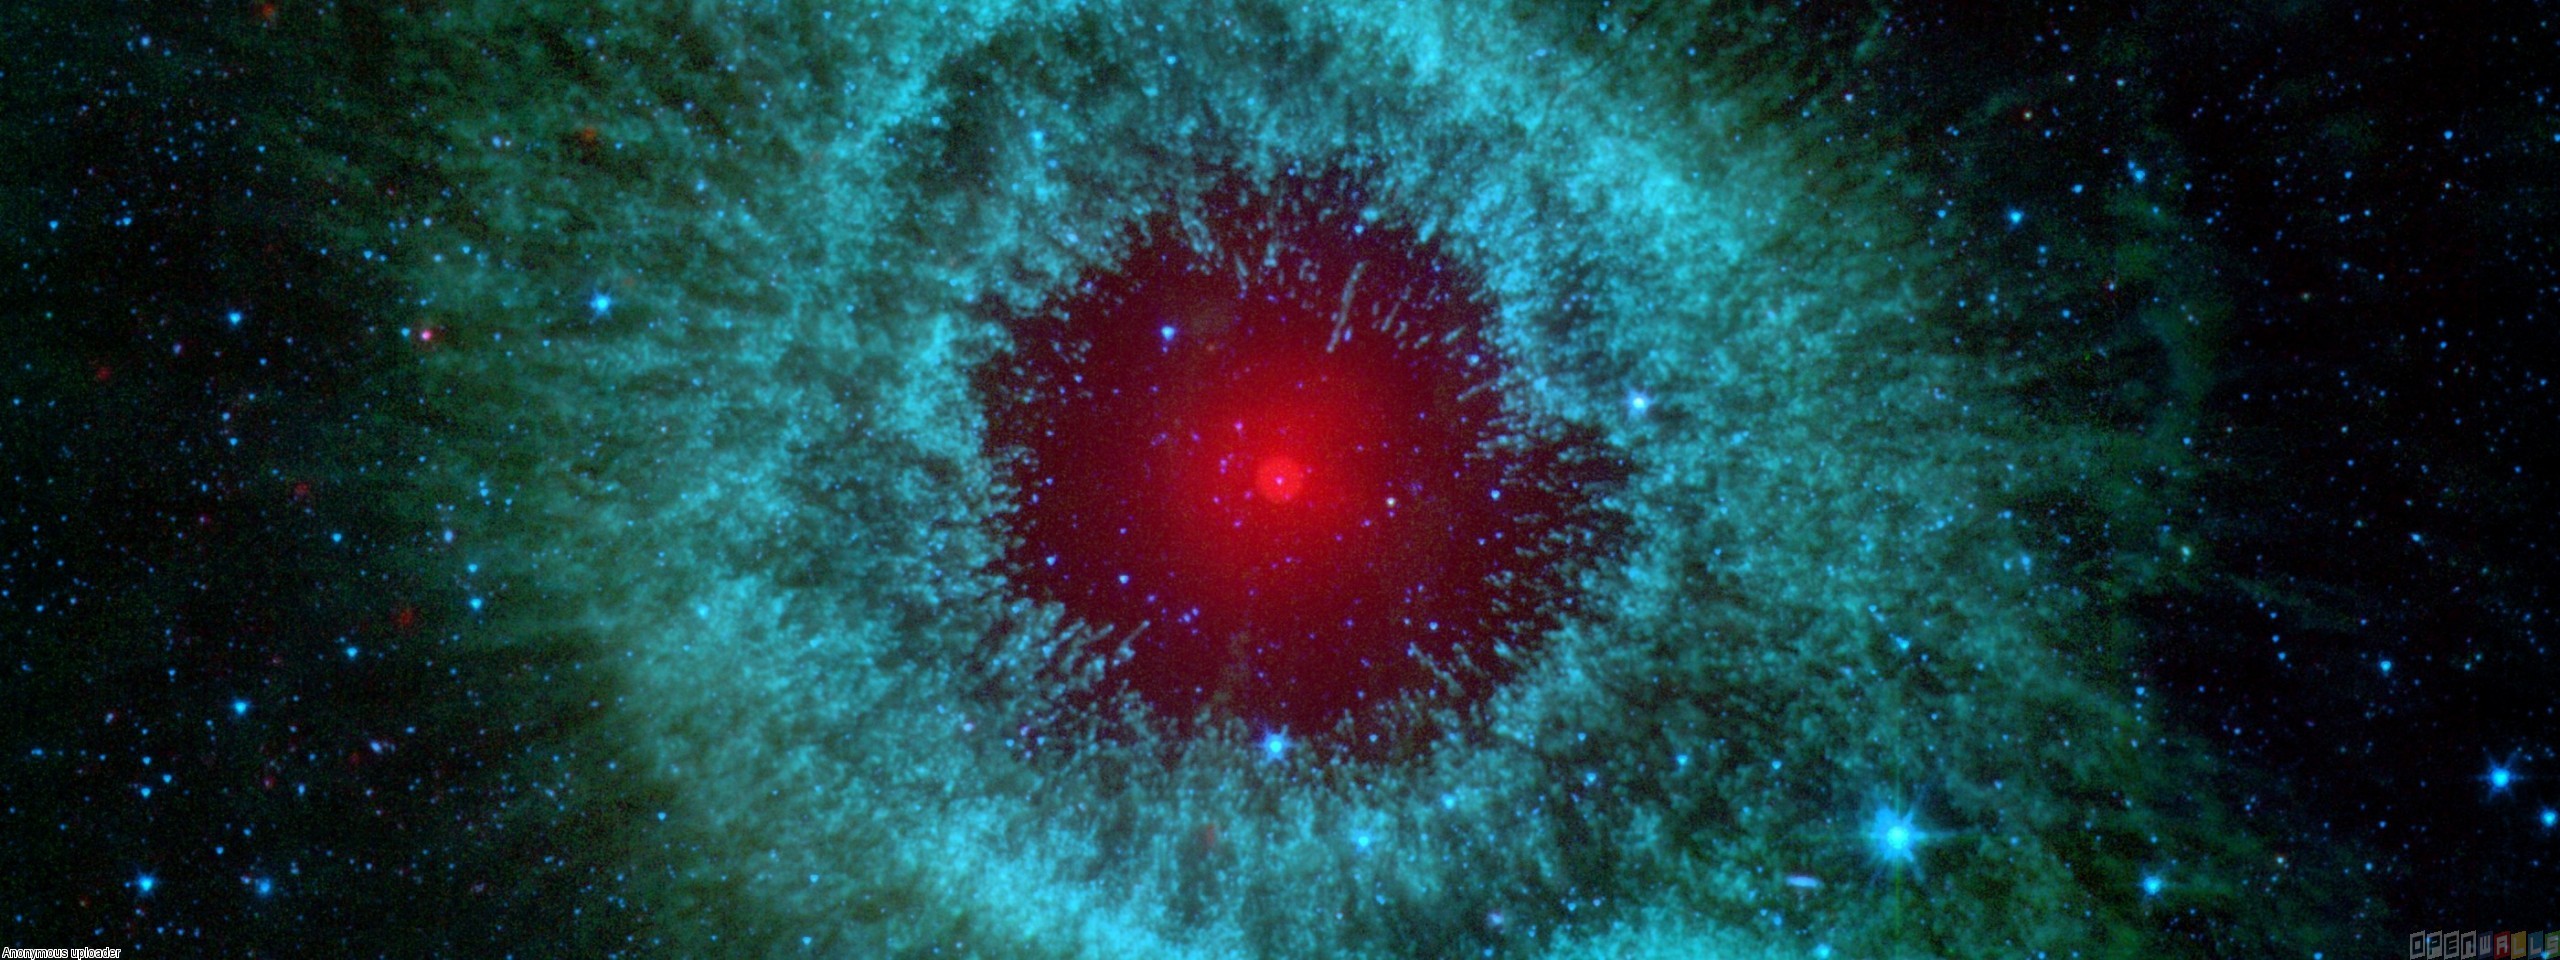 Infrared image of the helix nebula wallpaper 3204   Open Walls